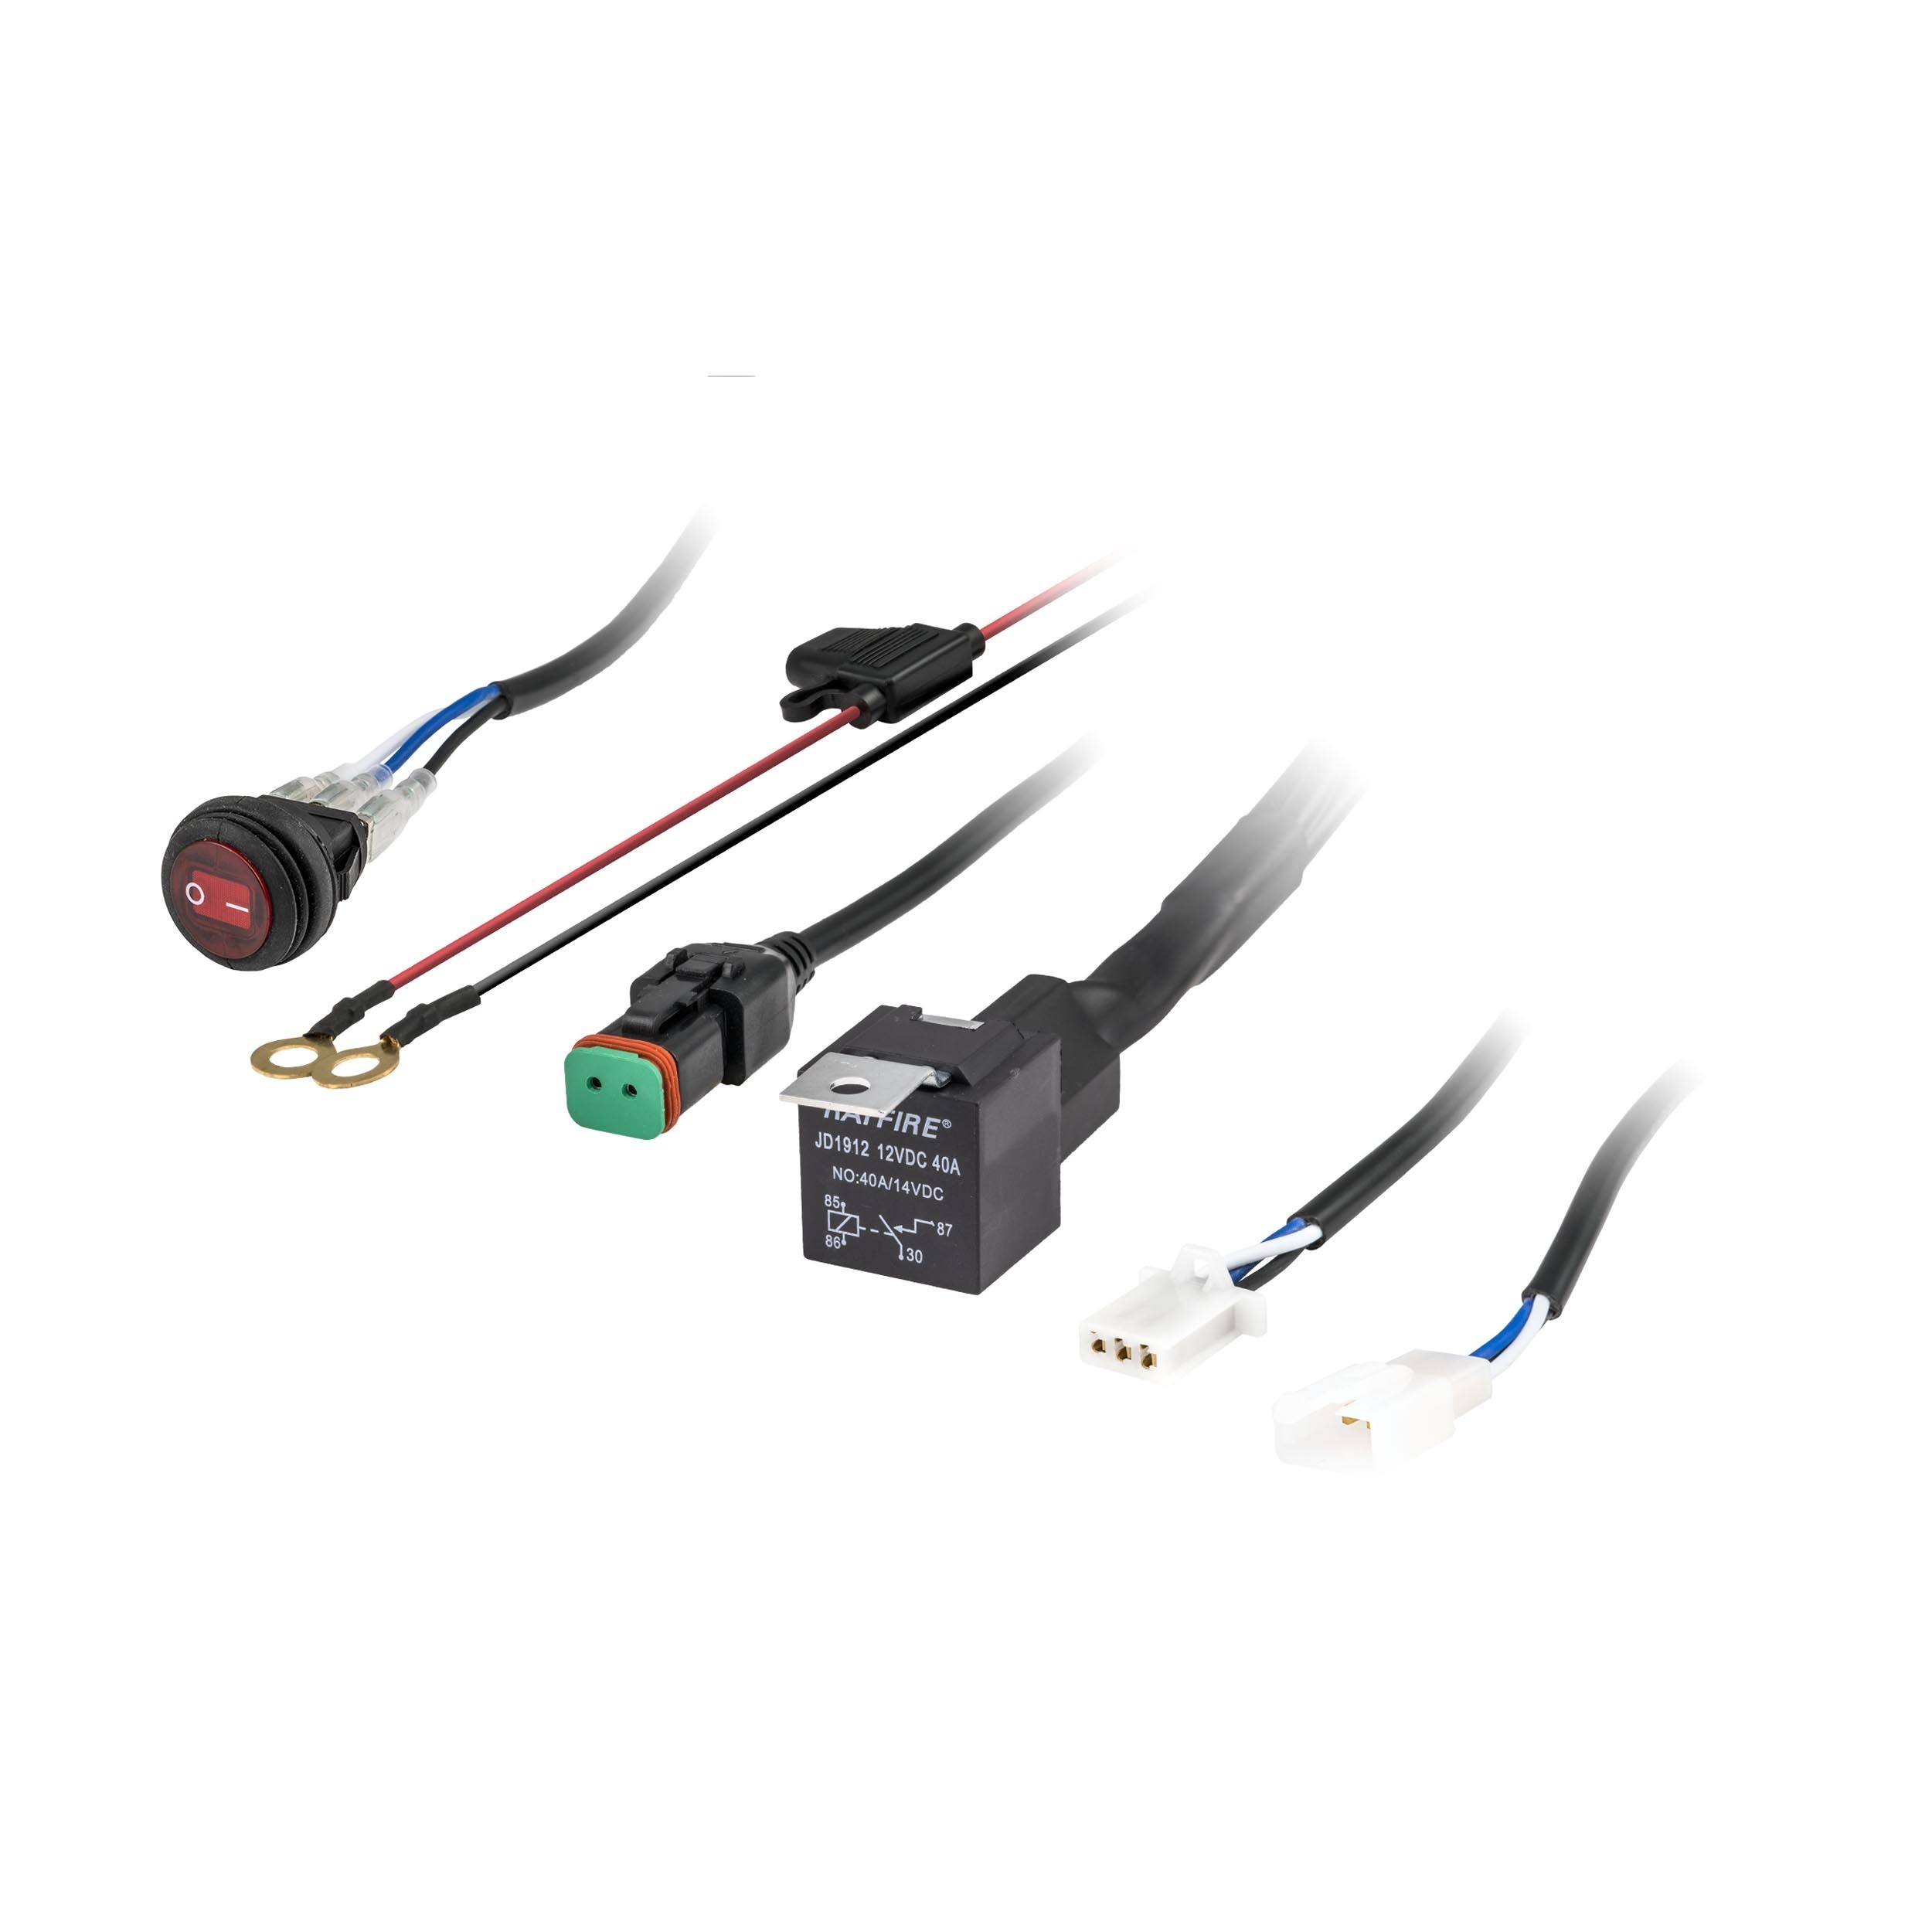 DT Wiring Harness and Switch Kit - 1 Lamp, Universal